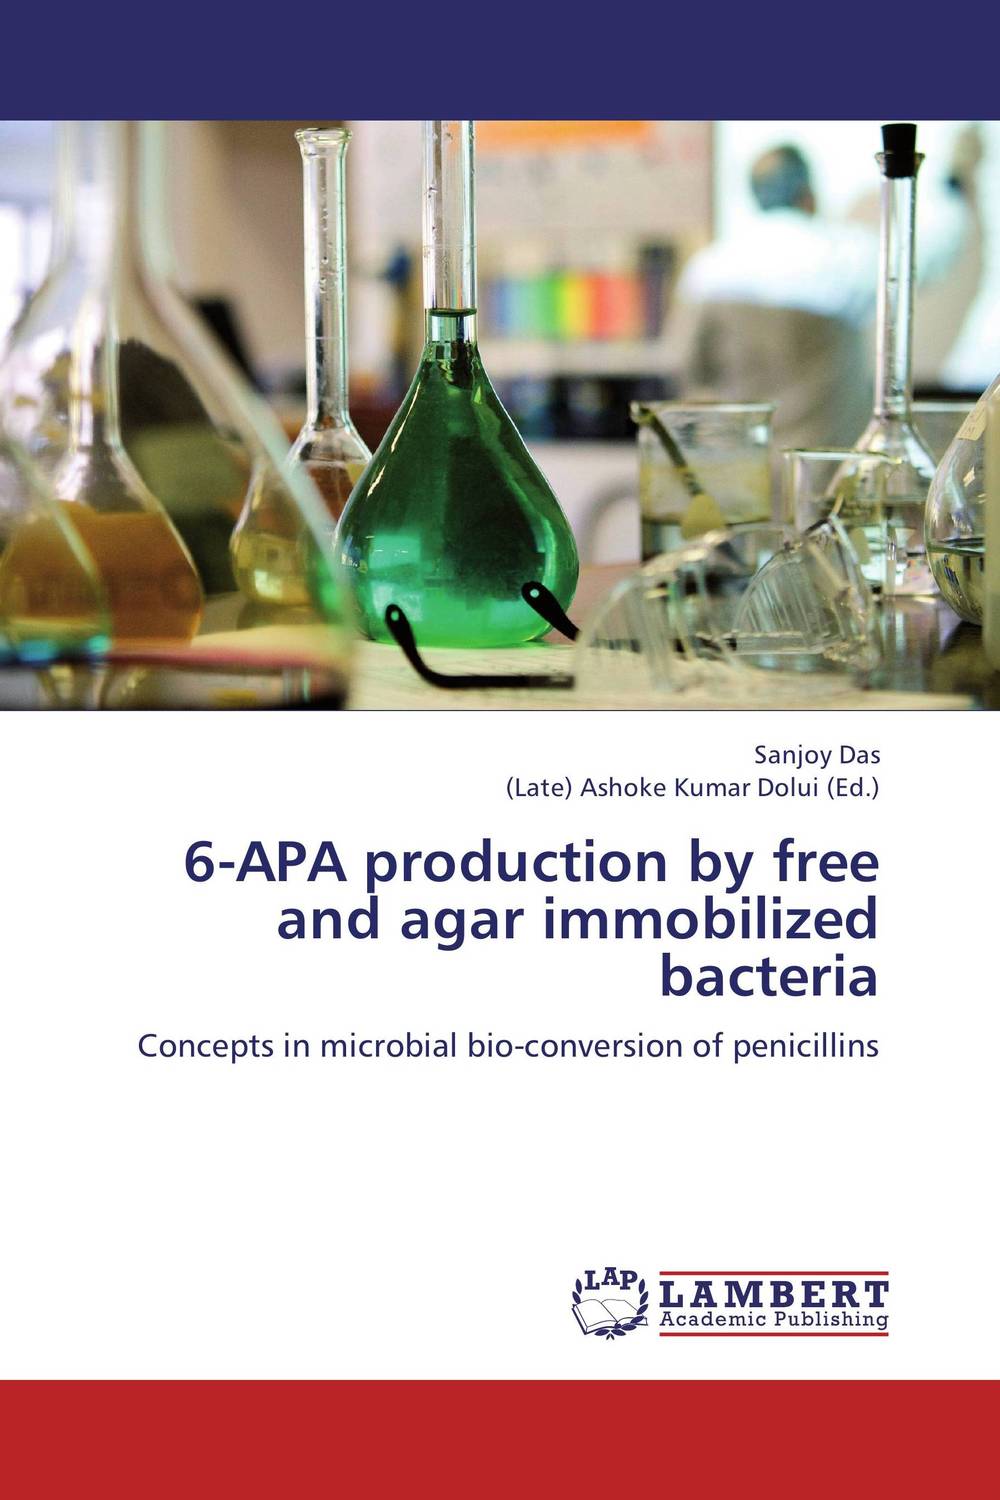 6-APA production by free and agar immobilized bacteria